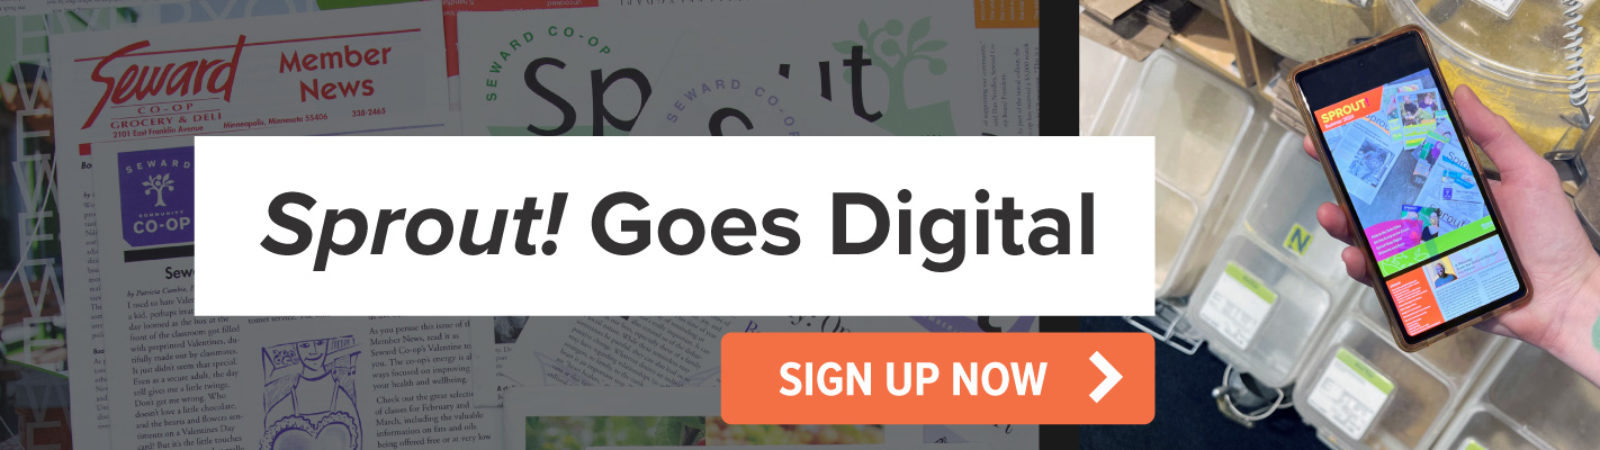 A banner to sign up for the new digital edition of the sprout!, with a button that says "sign up now"